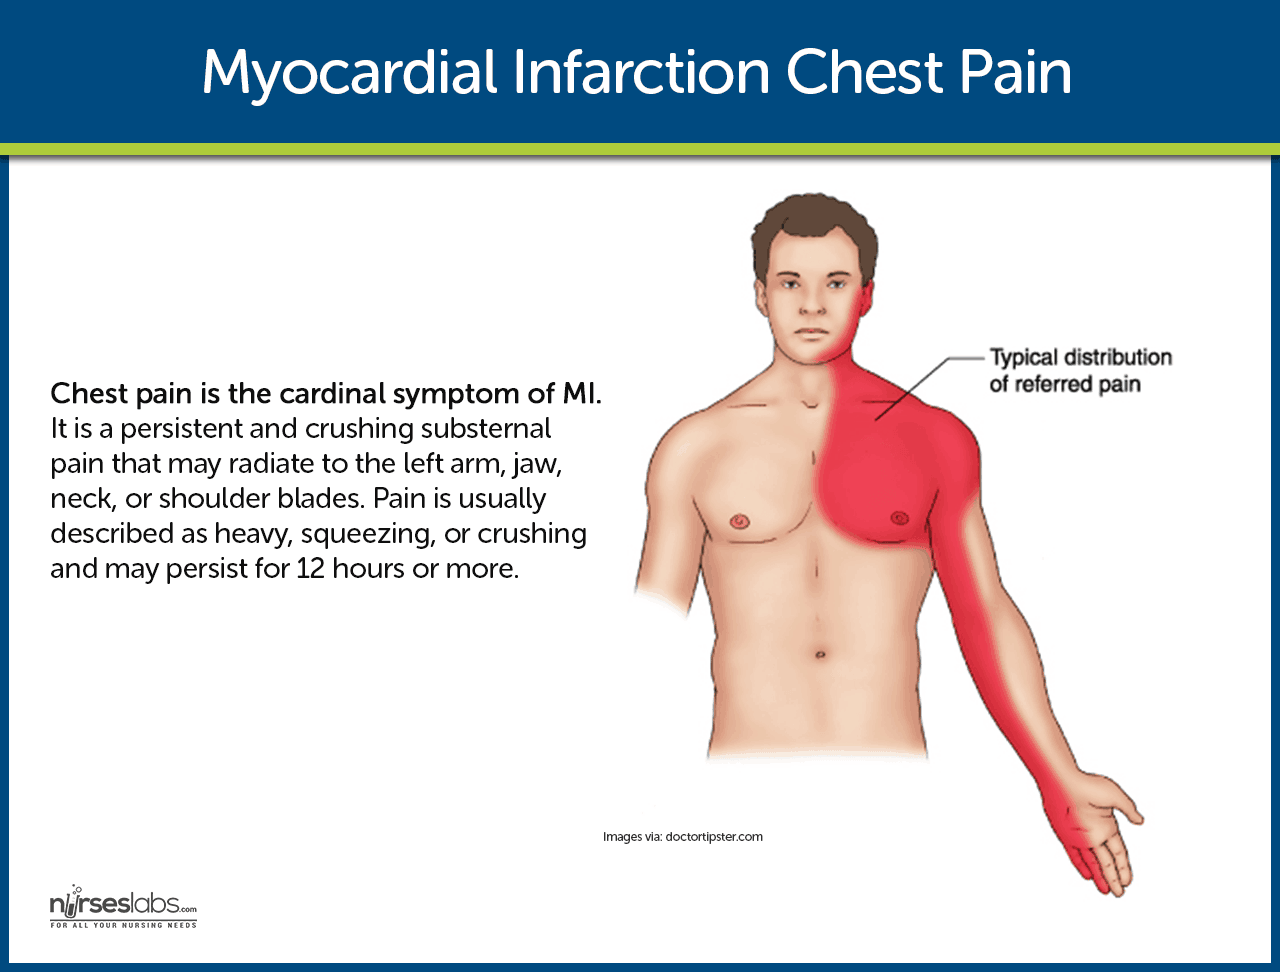 Location of Chest Pain During Myocardial Infarction